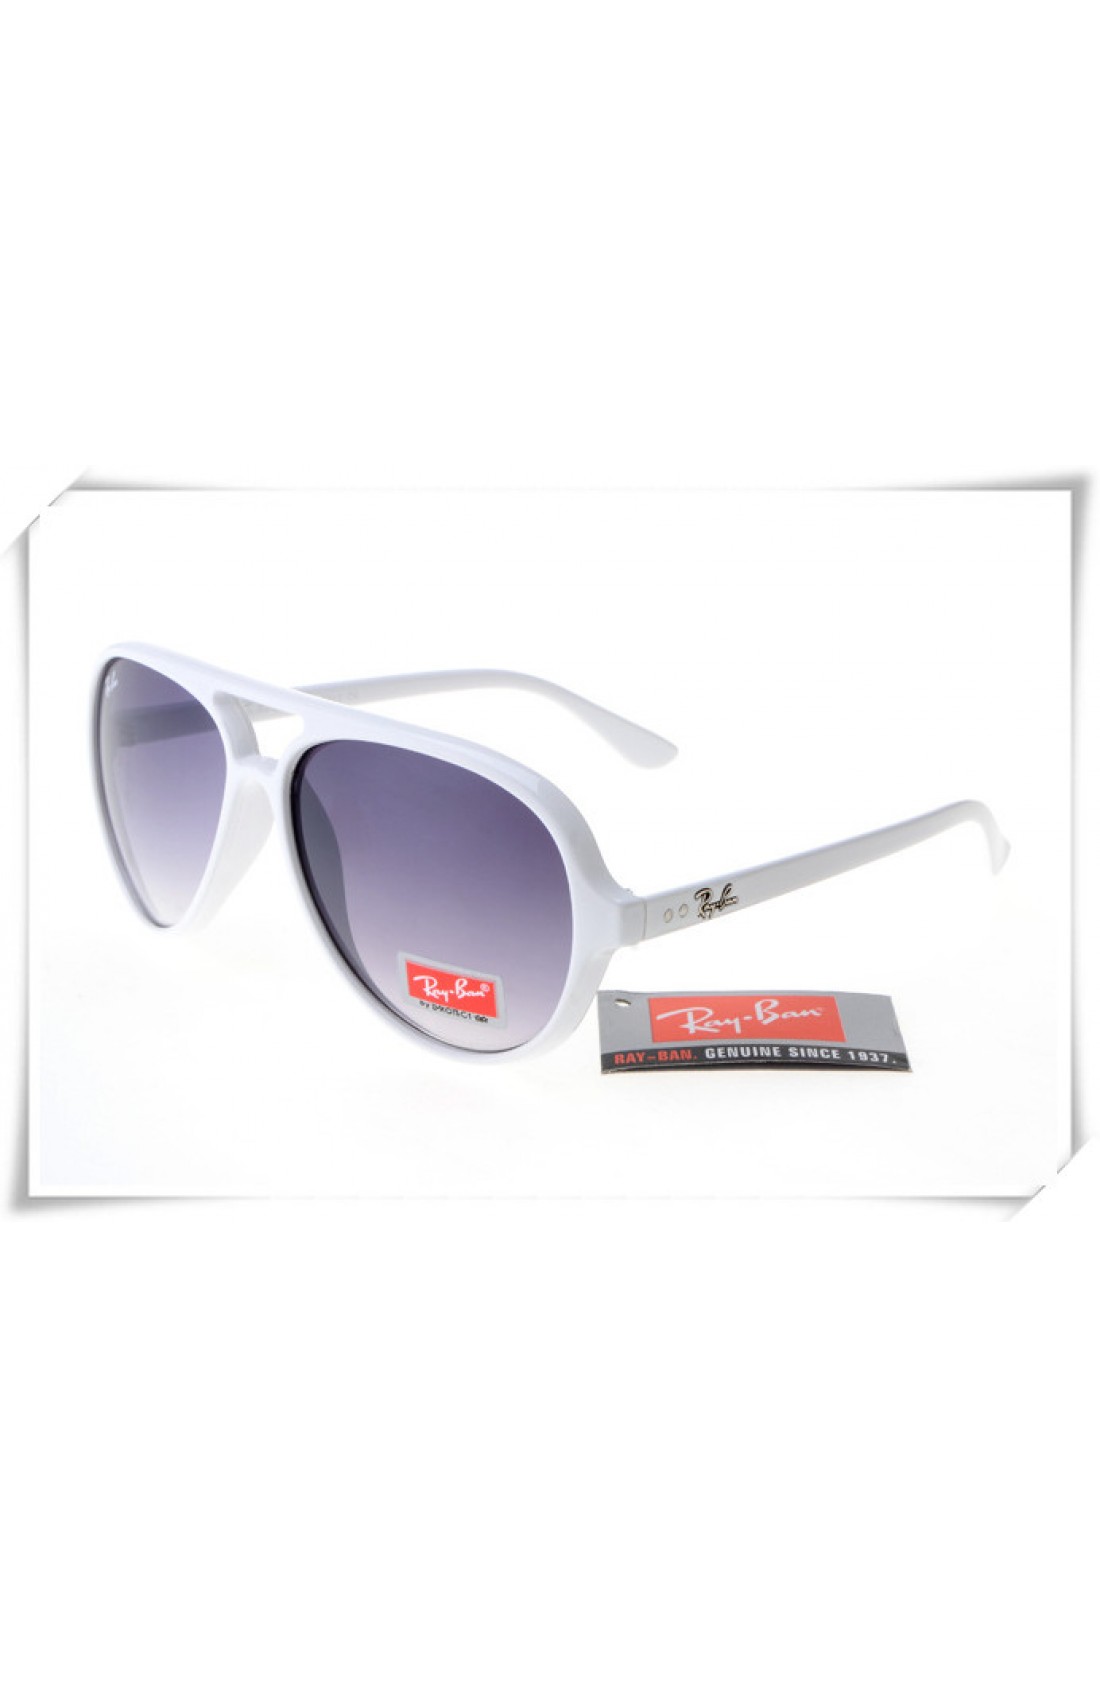 Replica Ray Ban RB4125 Cats 5000 